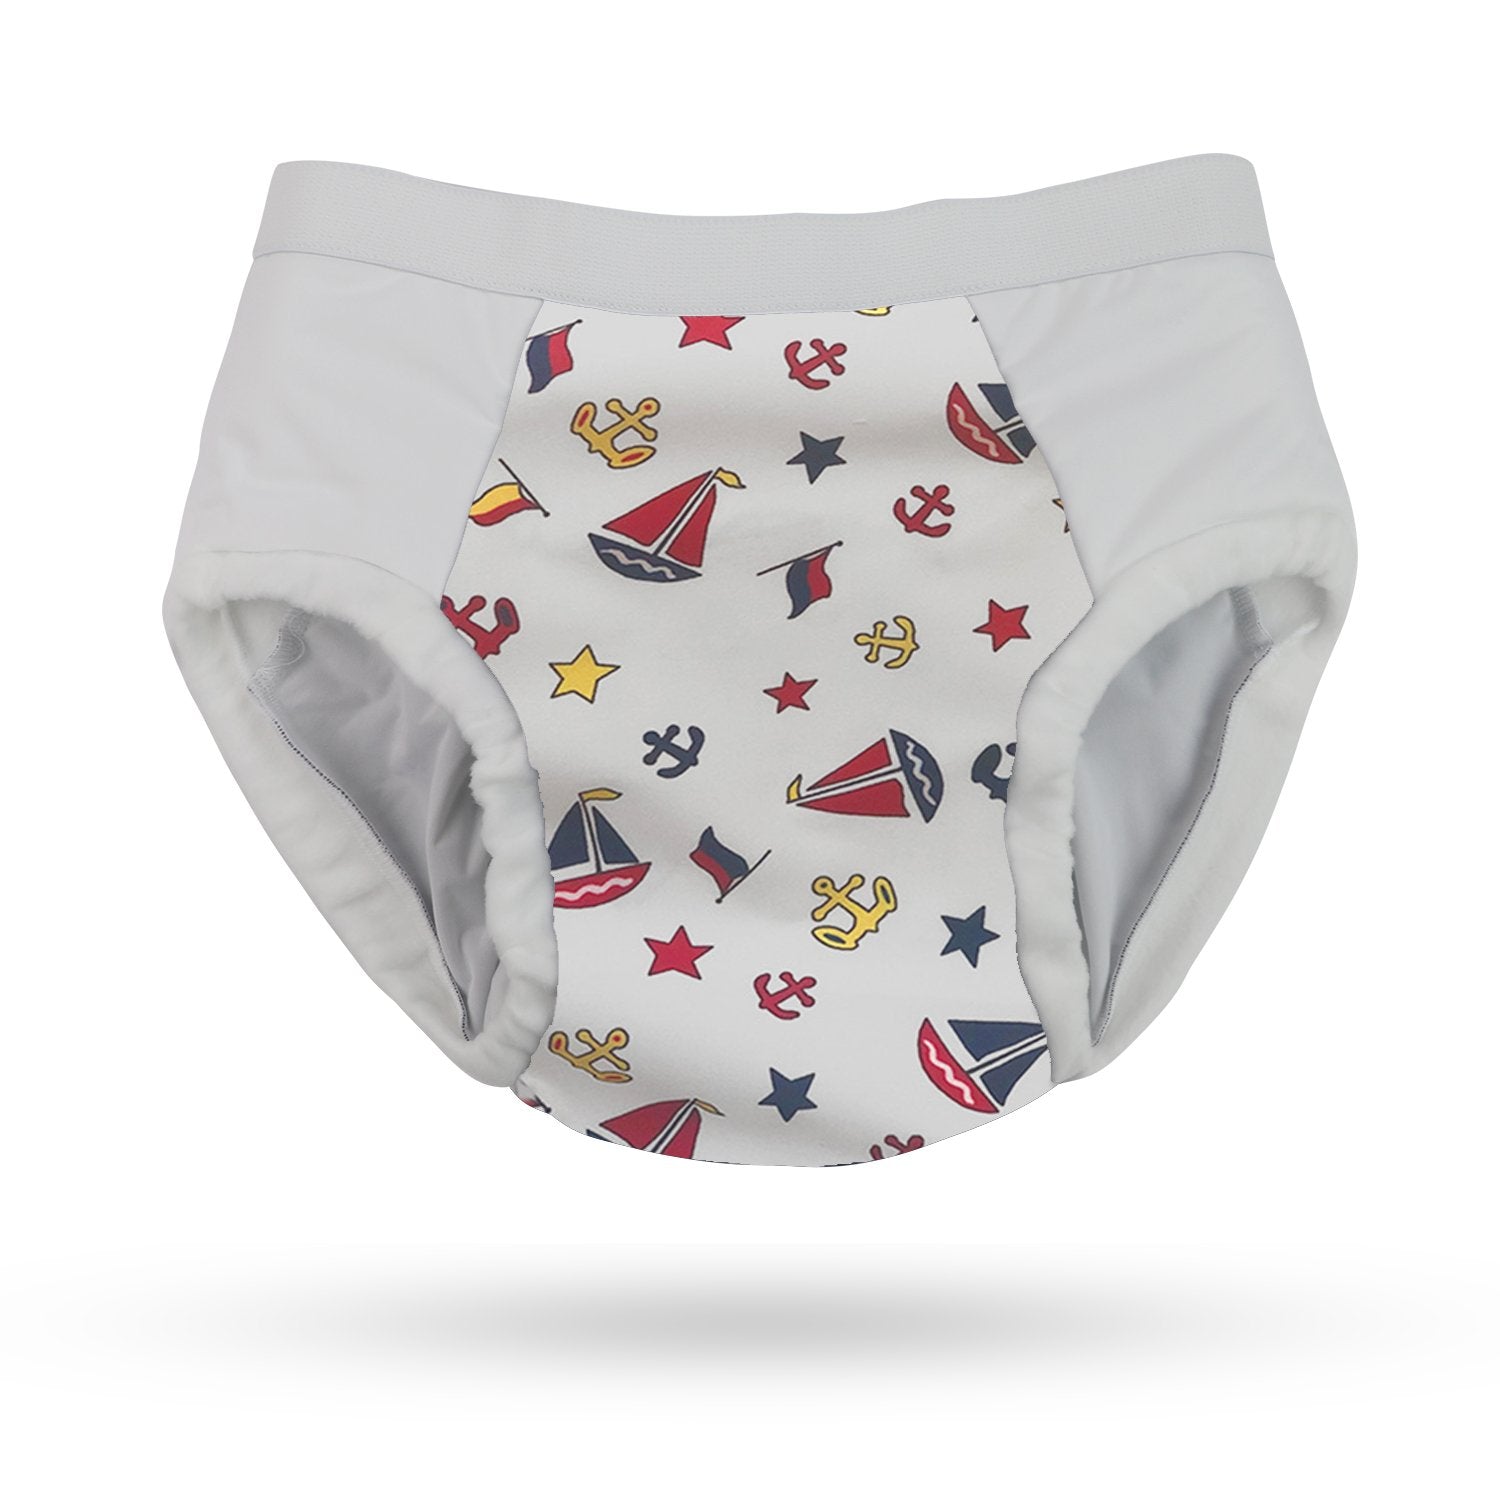 Which cloth diaper is best for an adult with urinary or bowel incontinence?